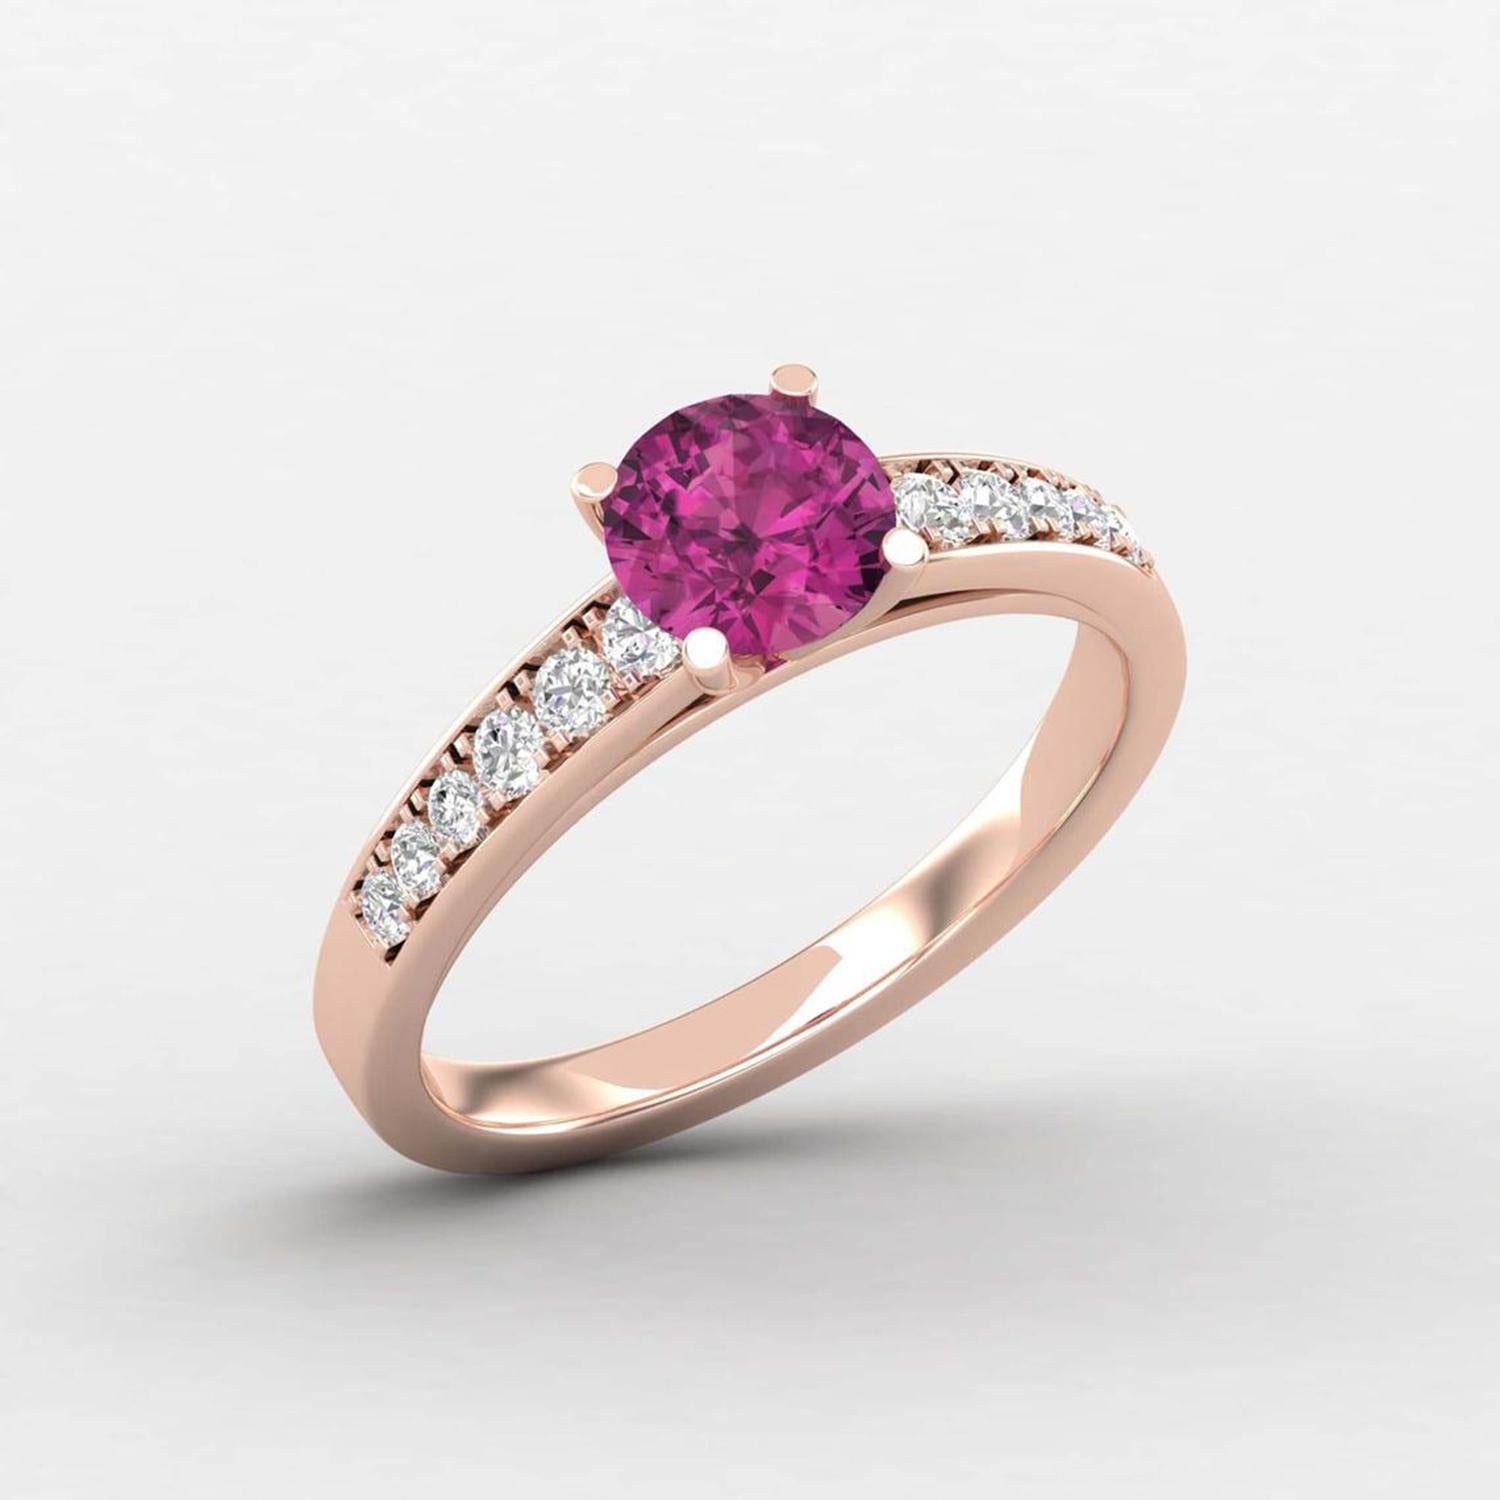 Round Cut 14 K Gold Rubellite Tourmaline Ring / Round Diamond Ring / Solitaire Ring For Sale